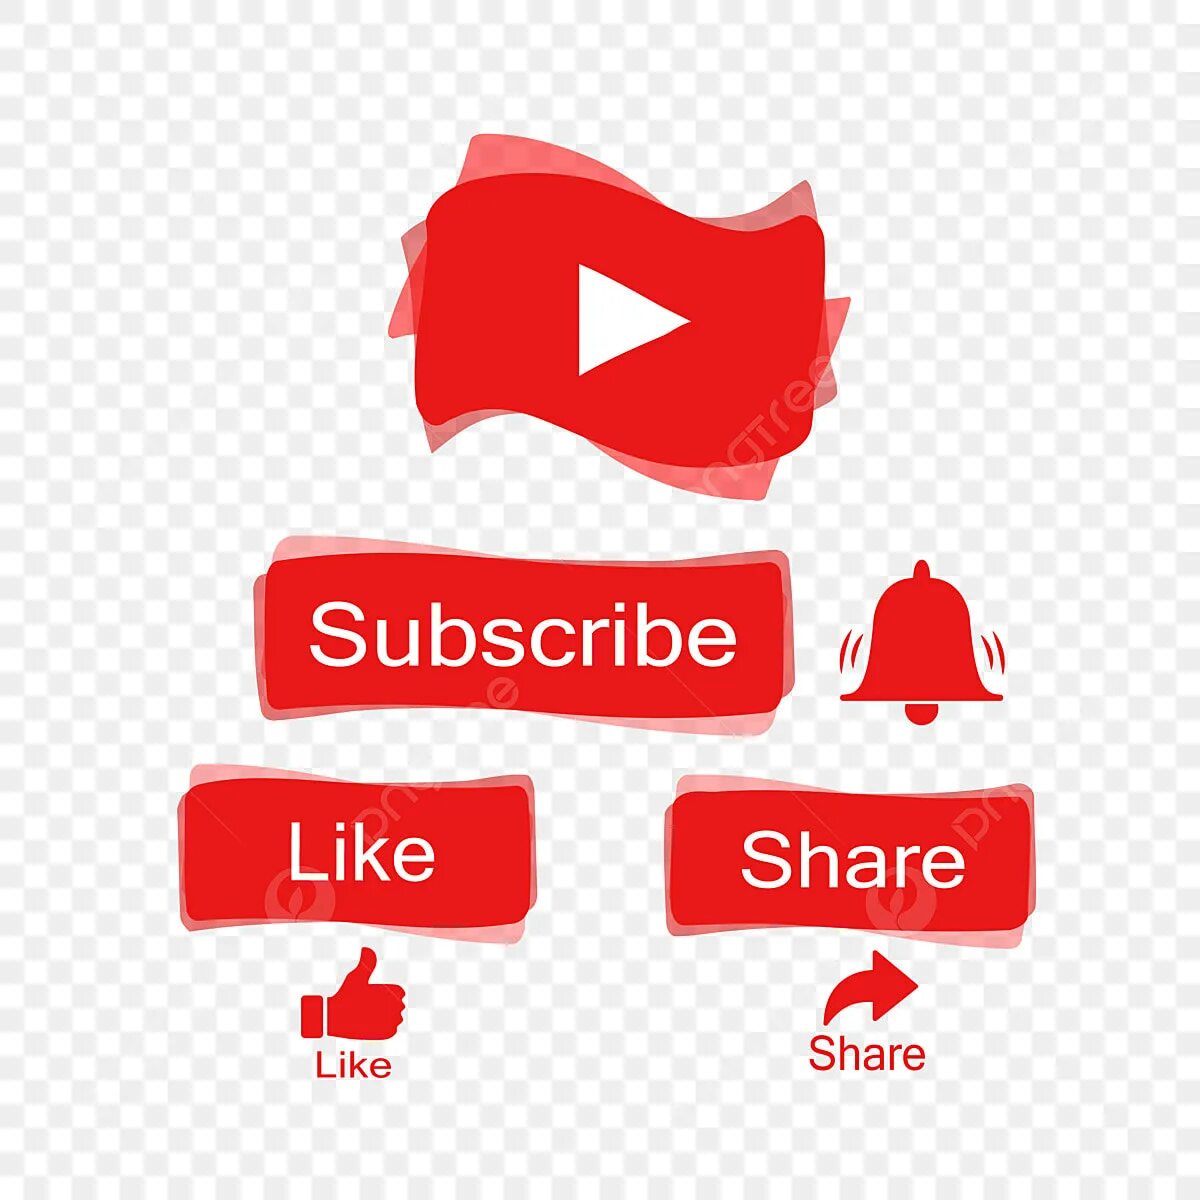 Subscribe shares. Like share Subscribe. Share like Subsk ribe. Like and Subscribe PNG. Like comment share PNG.